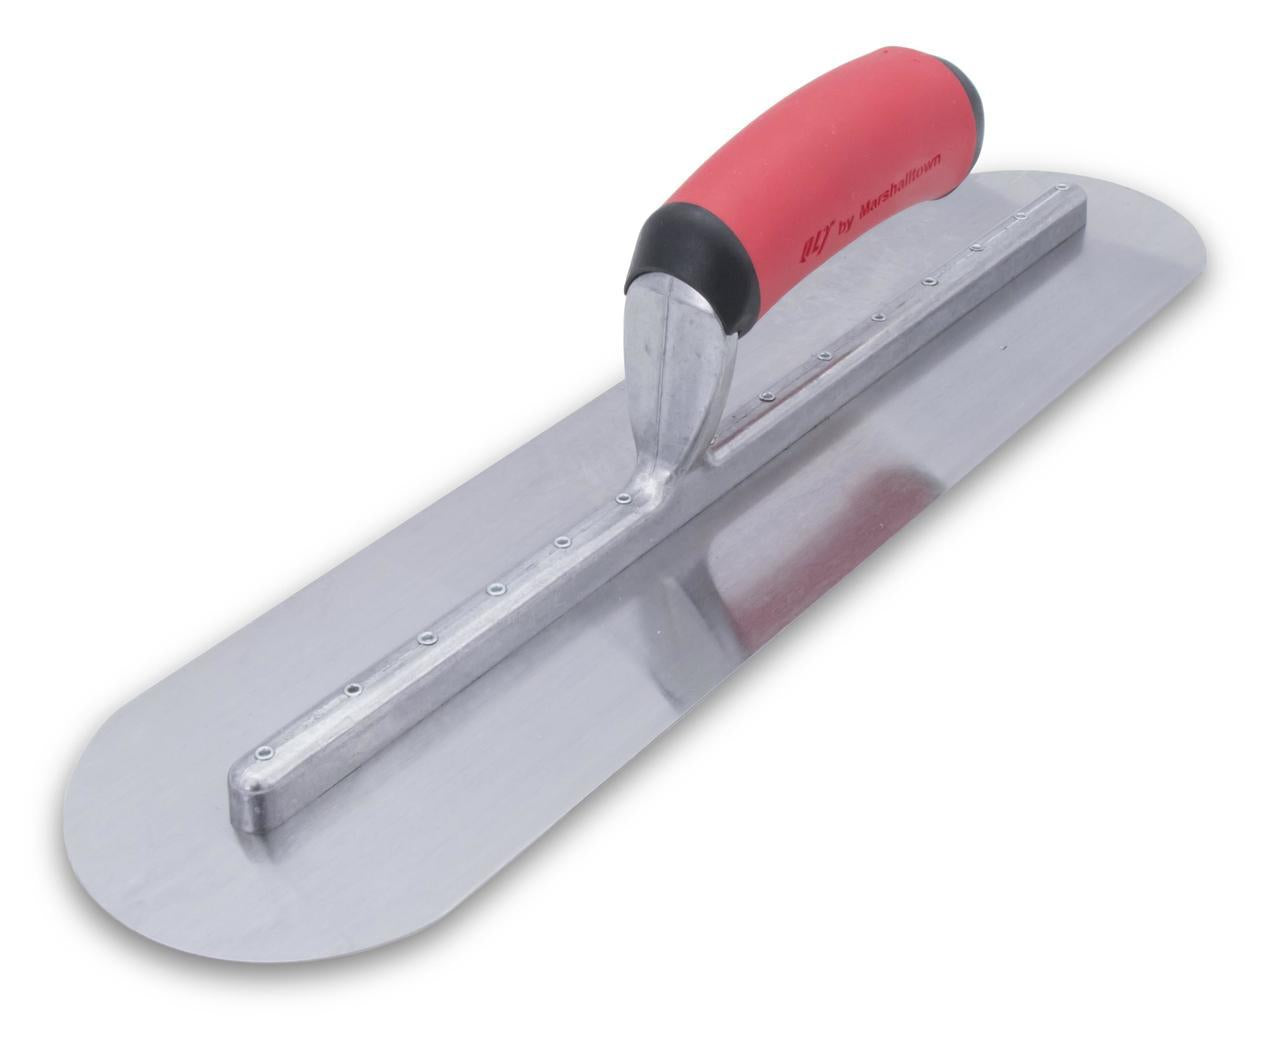 Marshalltown 11228 Concrete 20 X 5 Fully Rounded Finishing Trowel-Resilient Handle